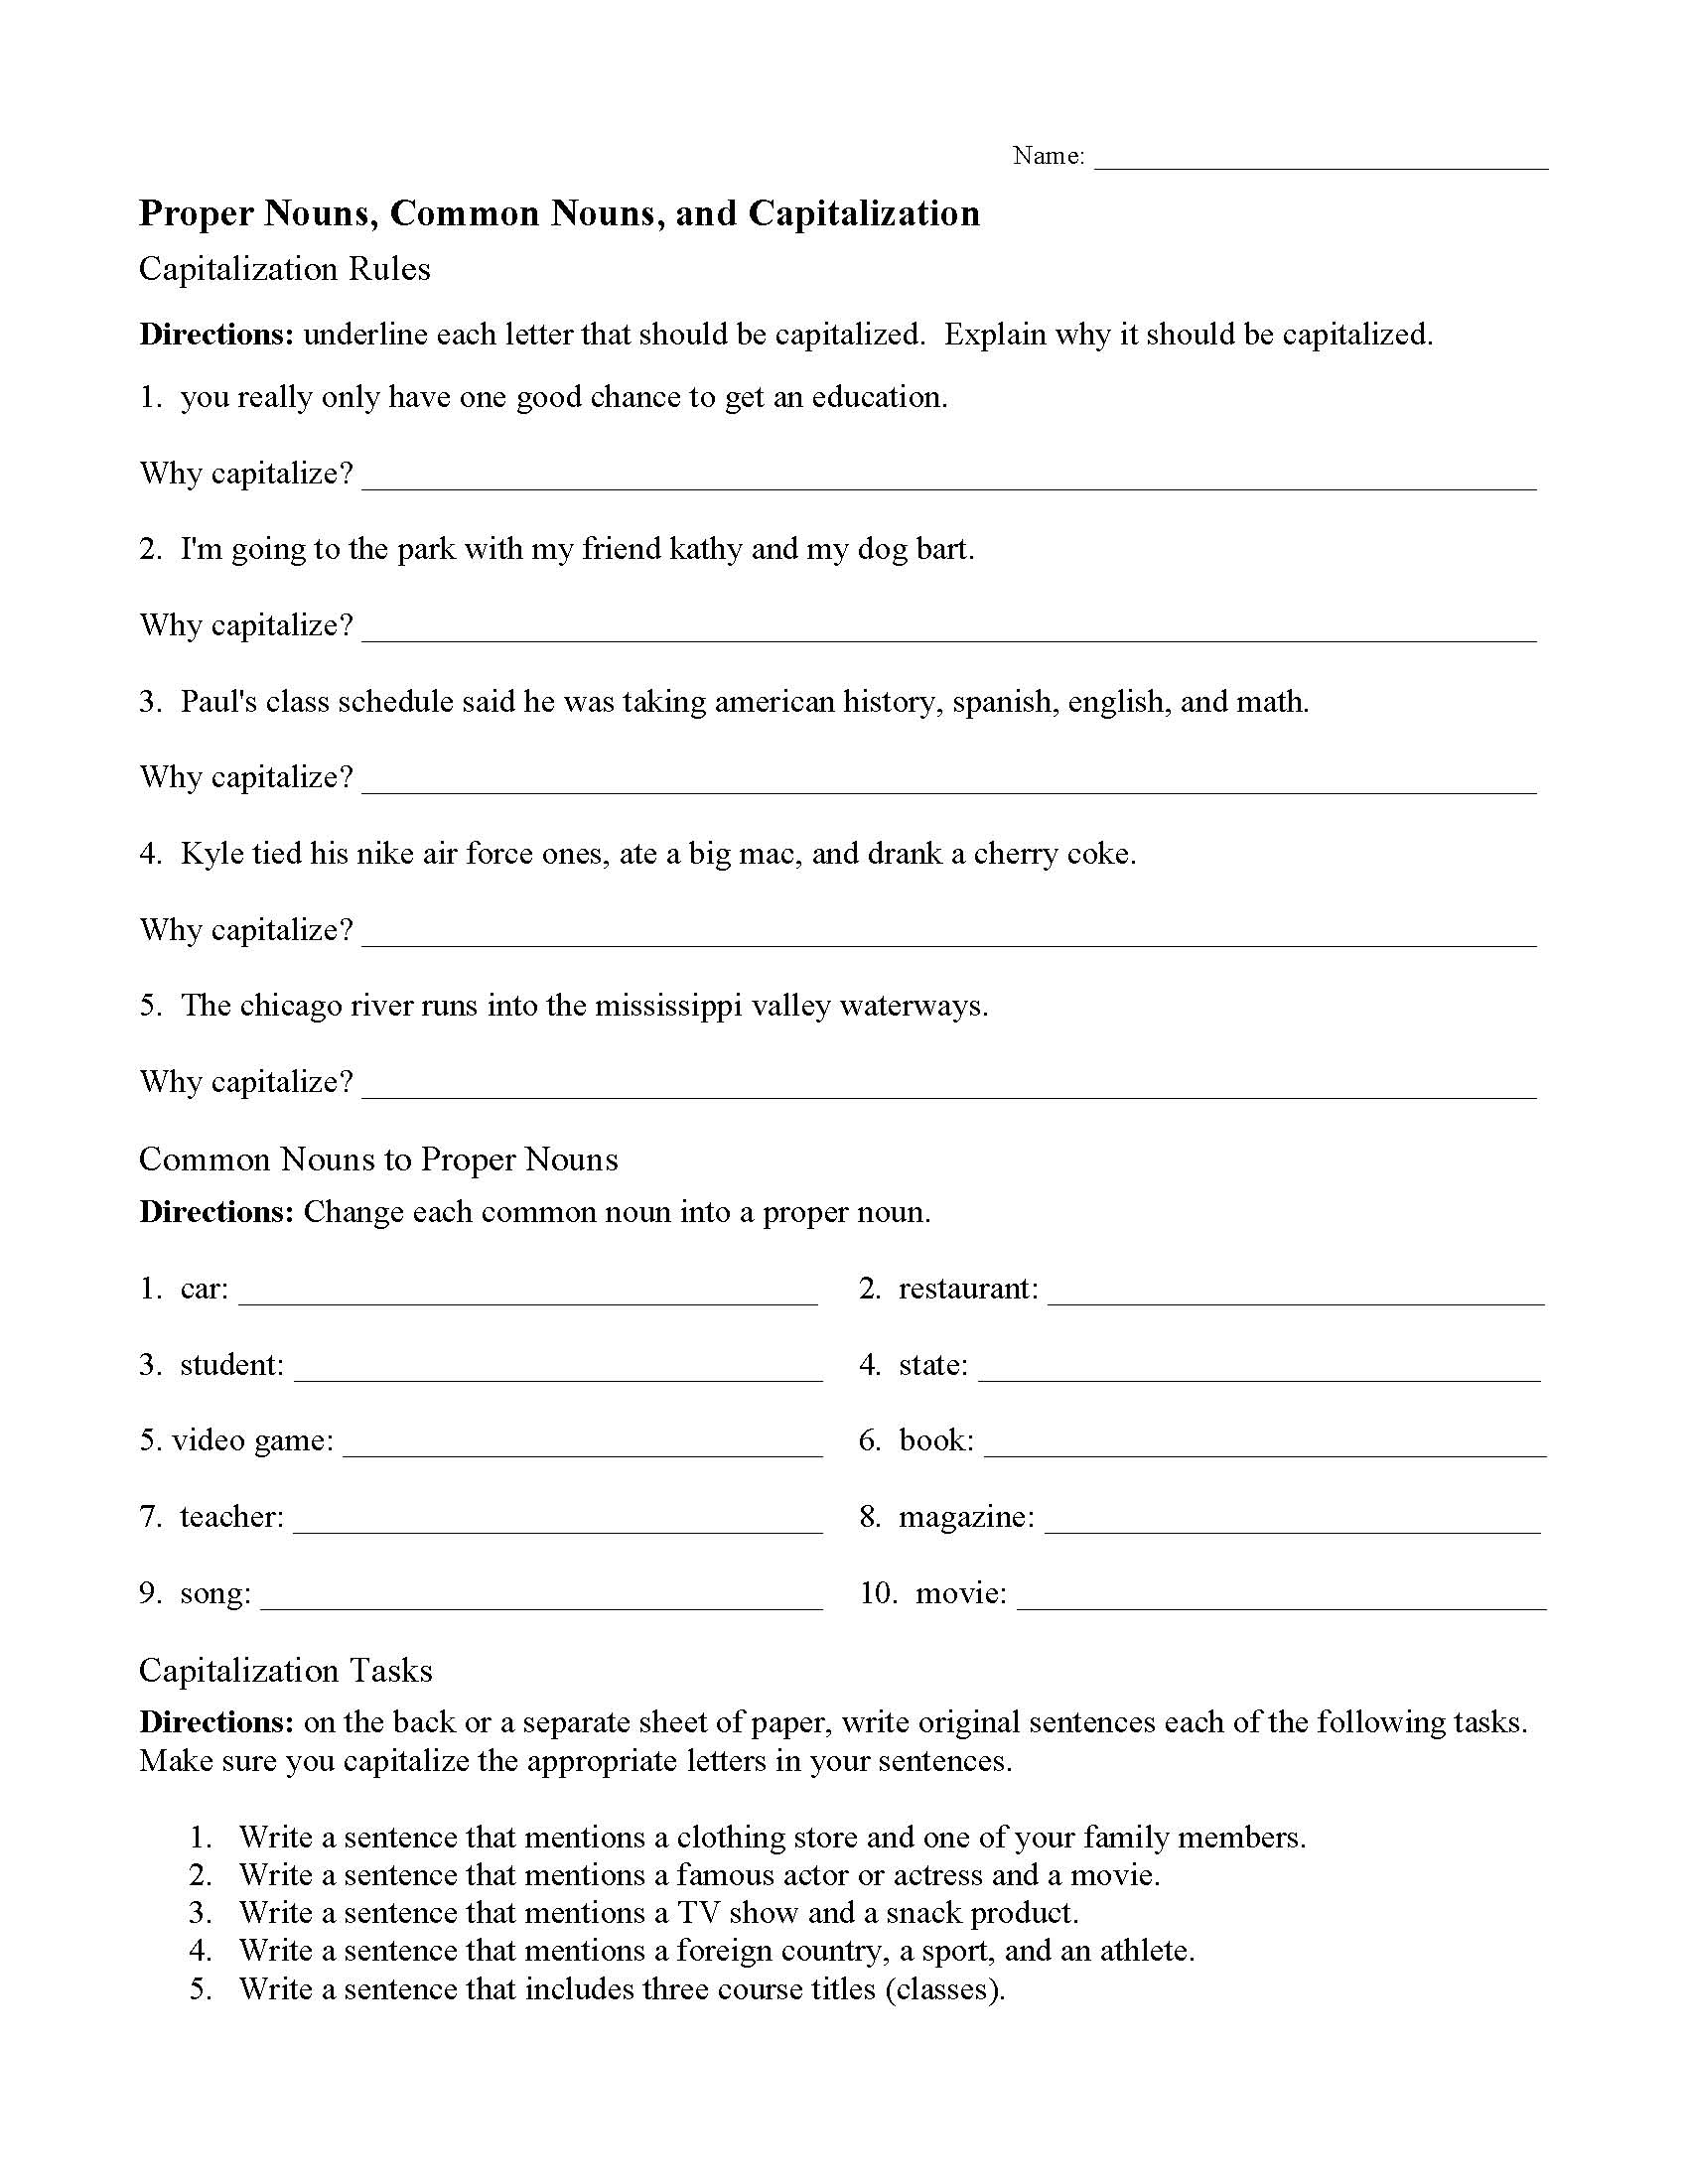 common-and-proper-noun-worksheet-for-class-3-a-brief-description-of-the-worksheets-is-on-each